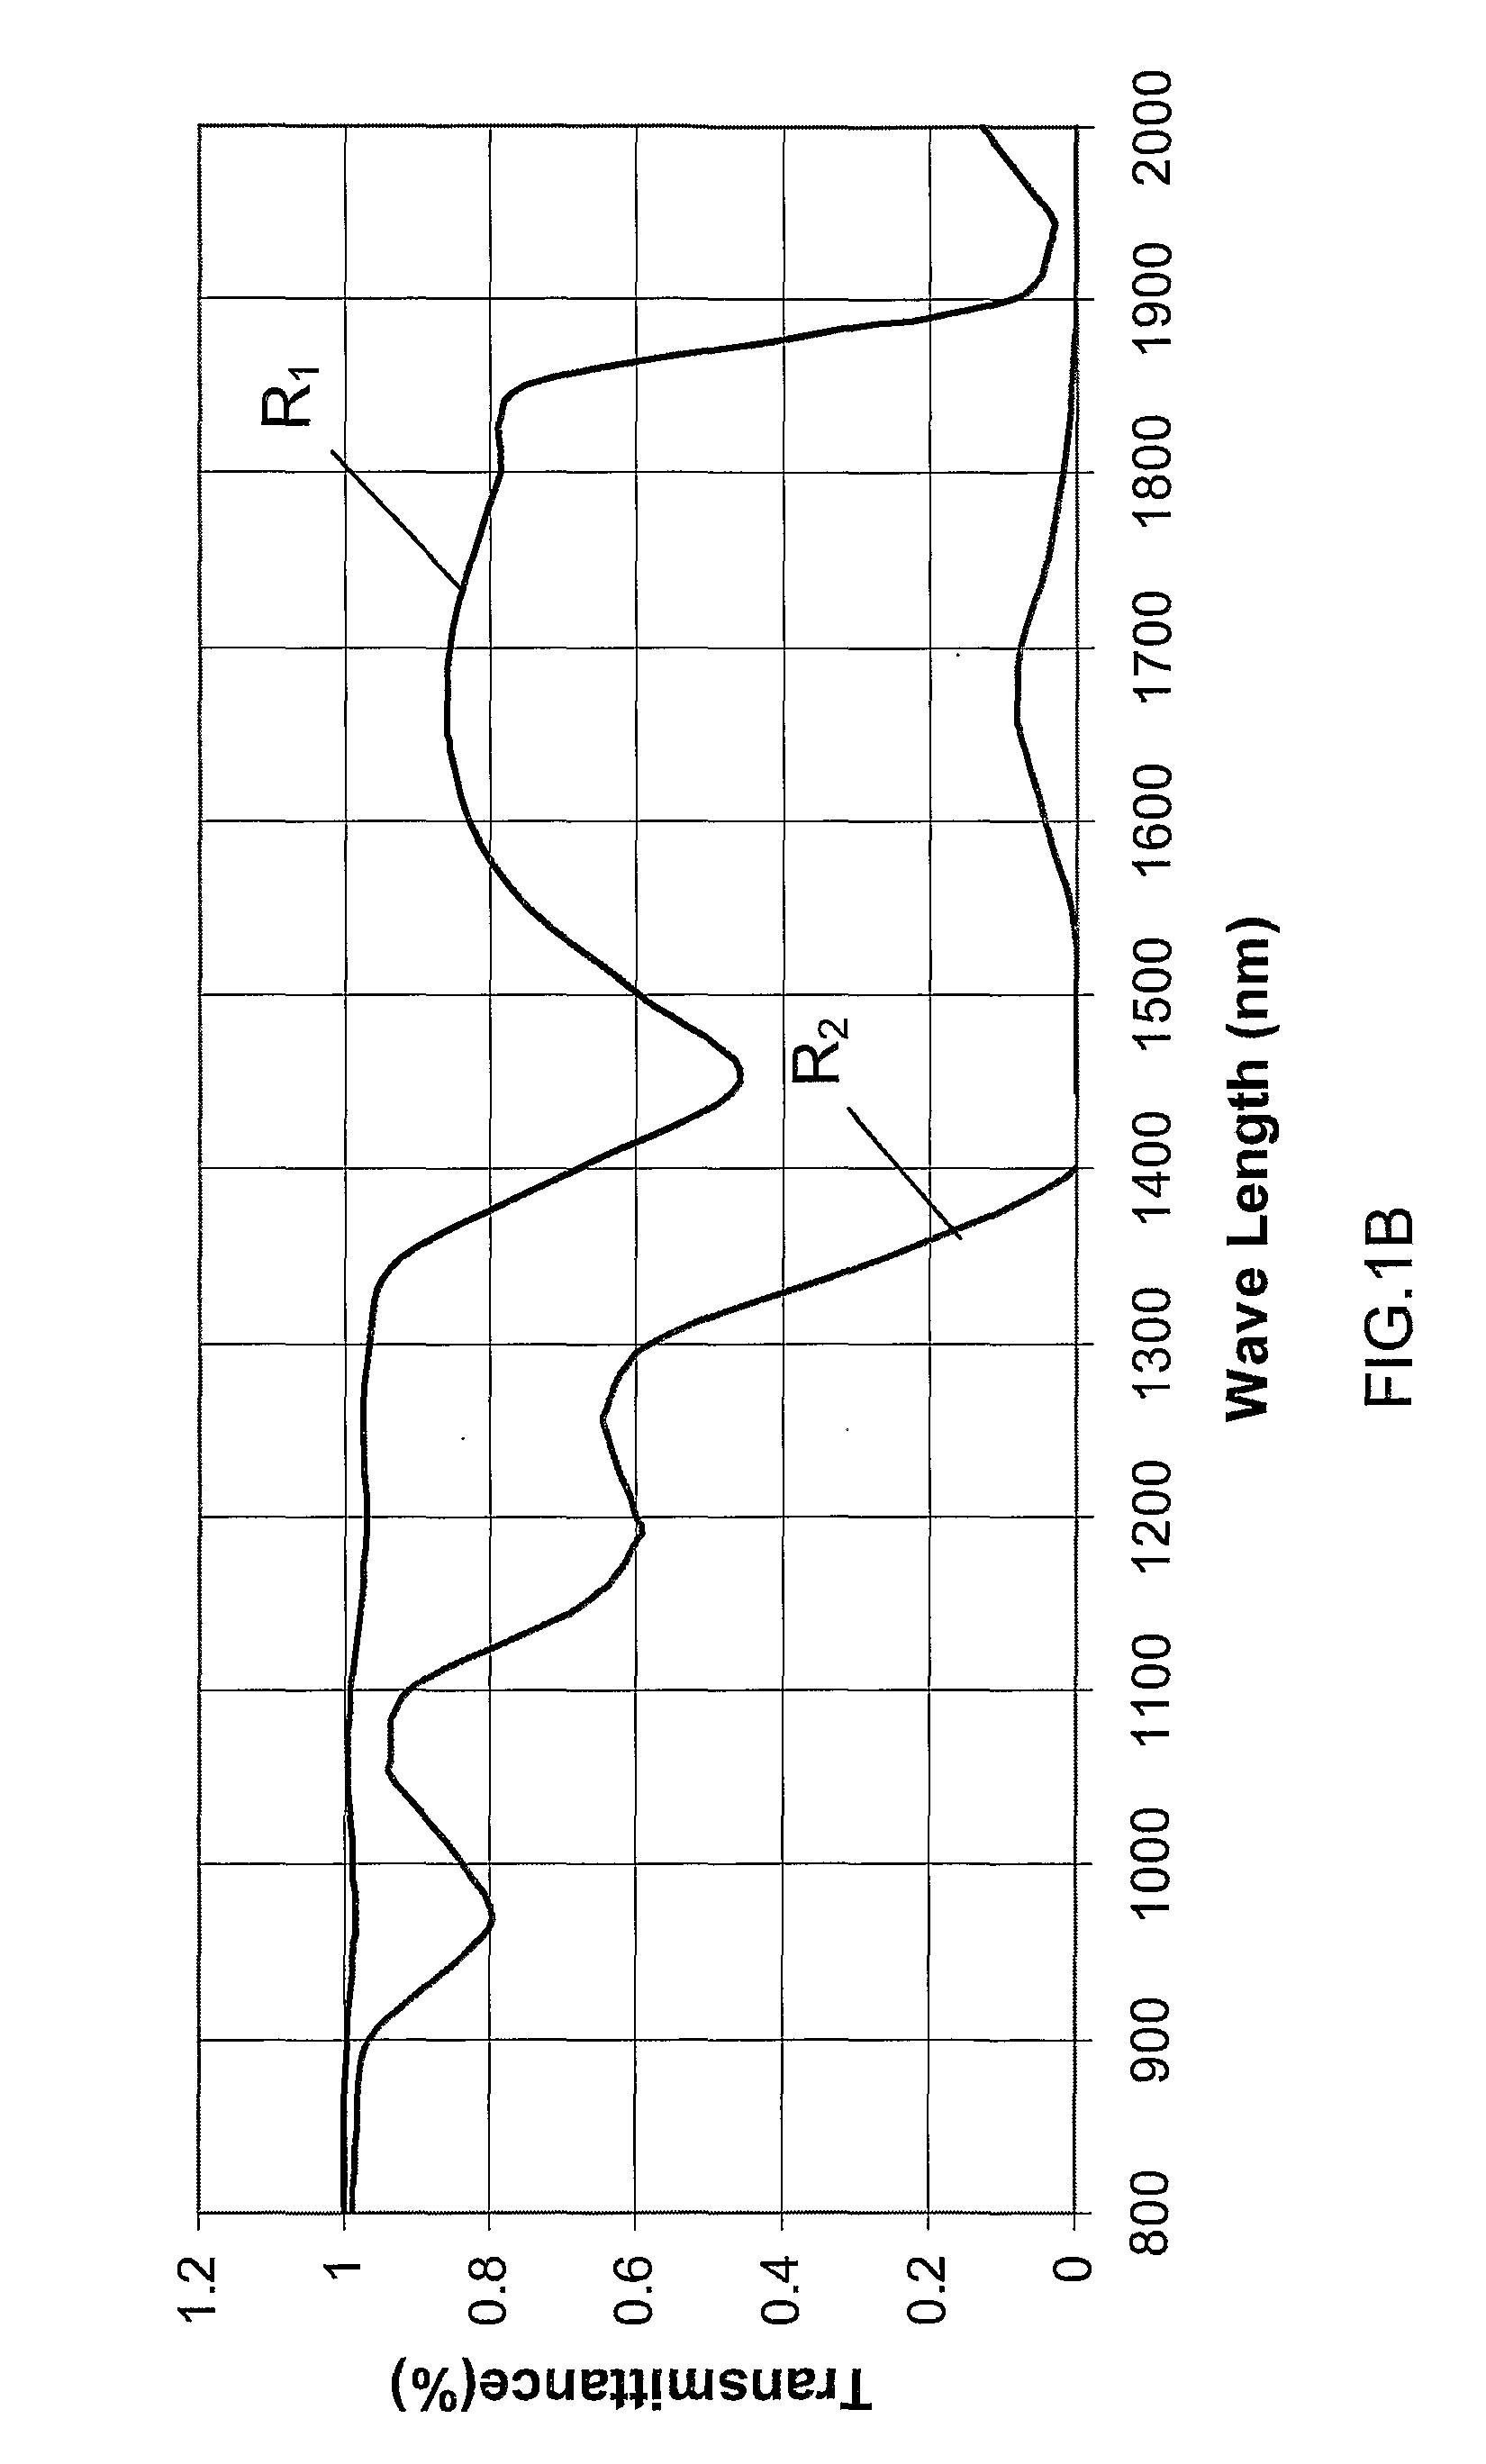 Measurement system and method for use in determining the patient's condition